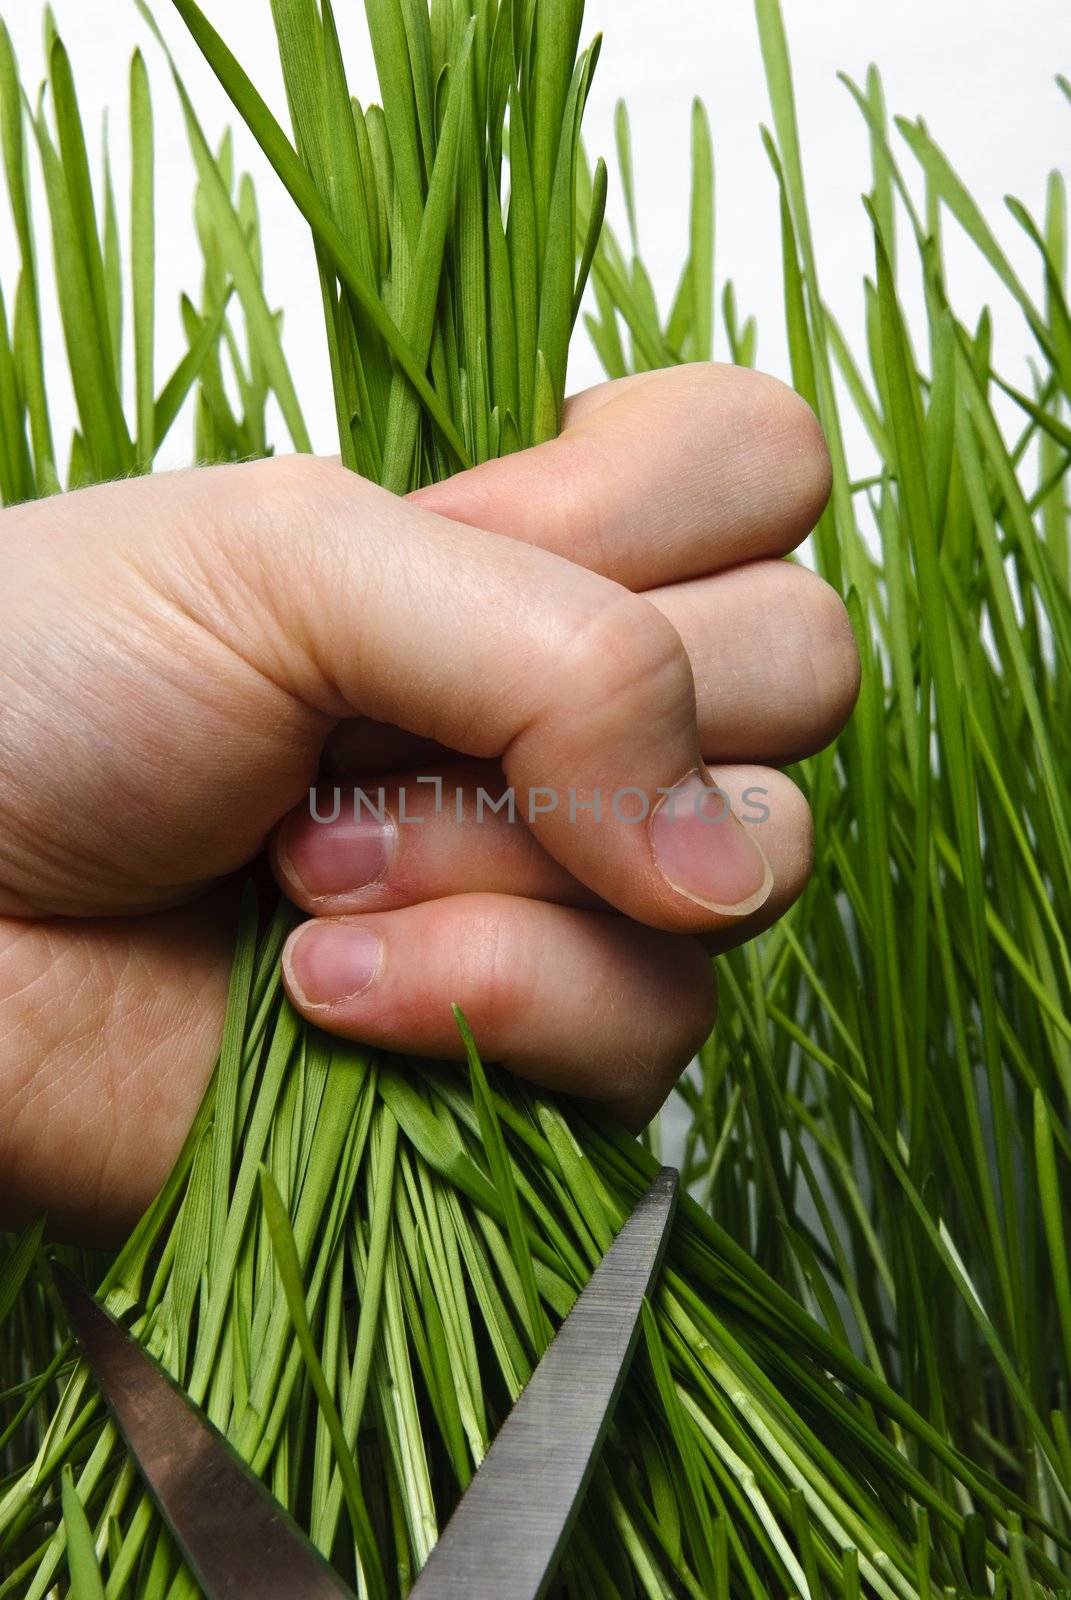 Cutting wheat with scissors